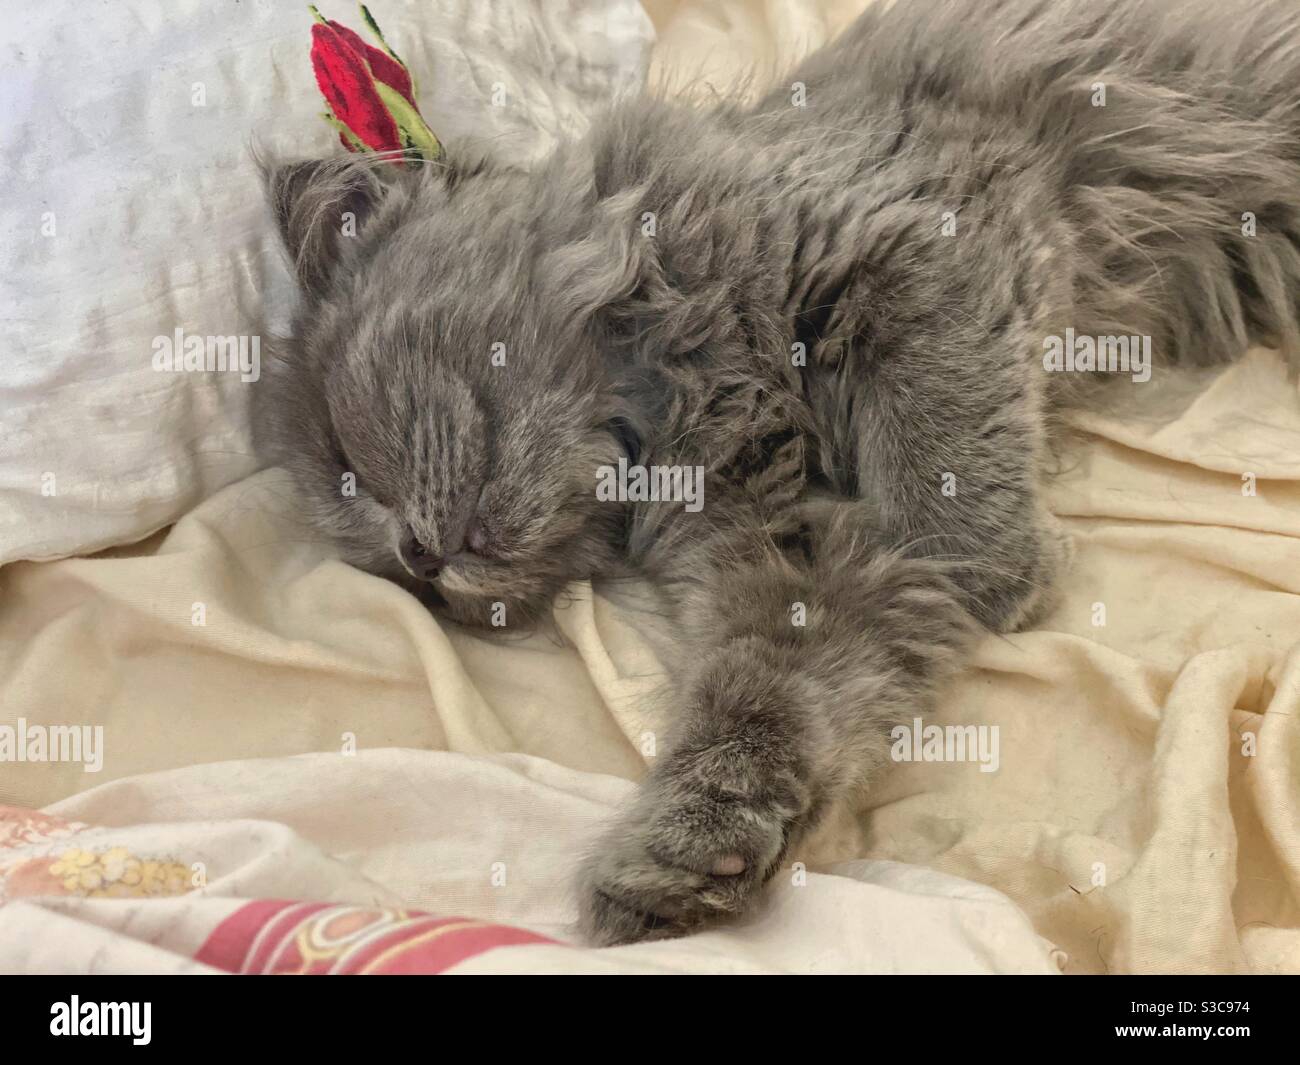 3 months old Blue Persian kitten sleeping in bed. Stock Photo